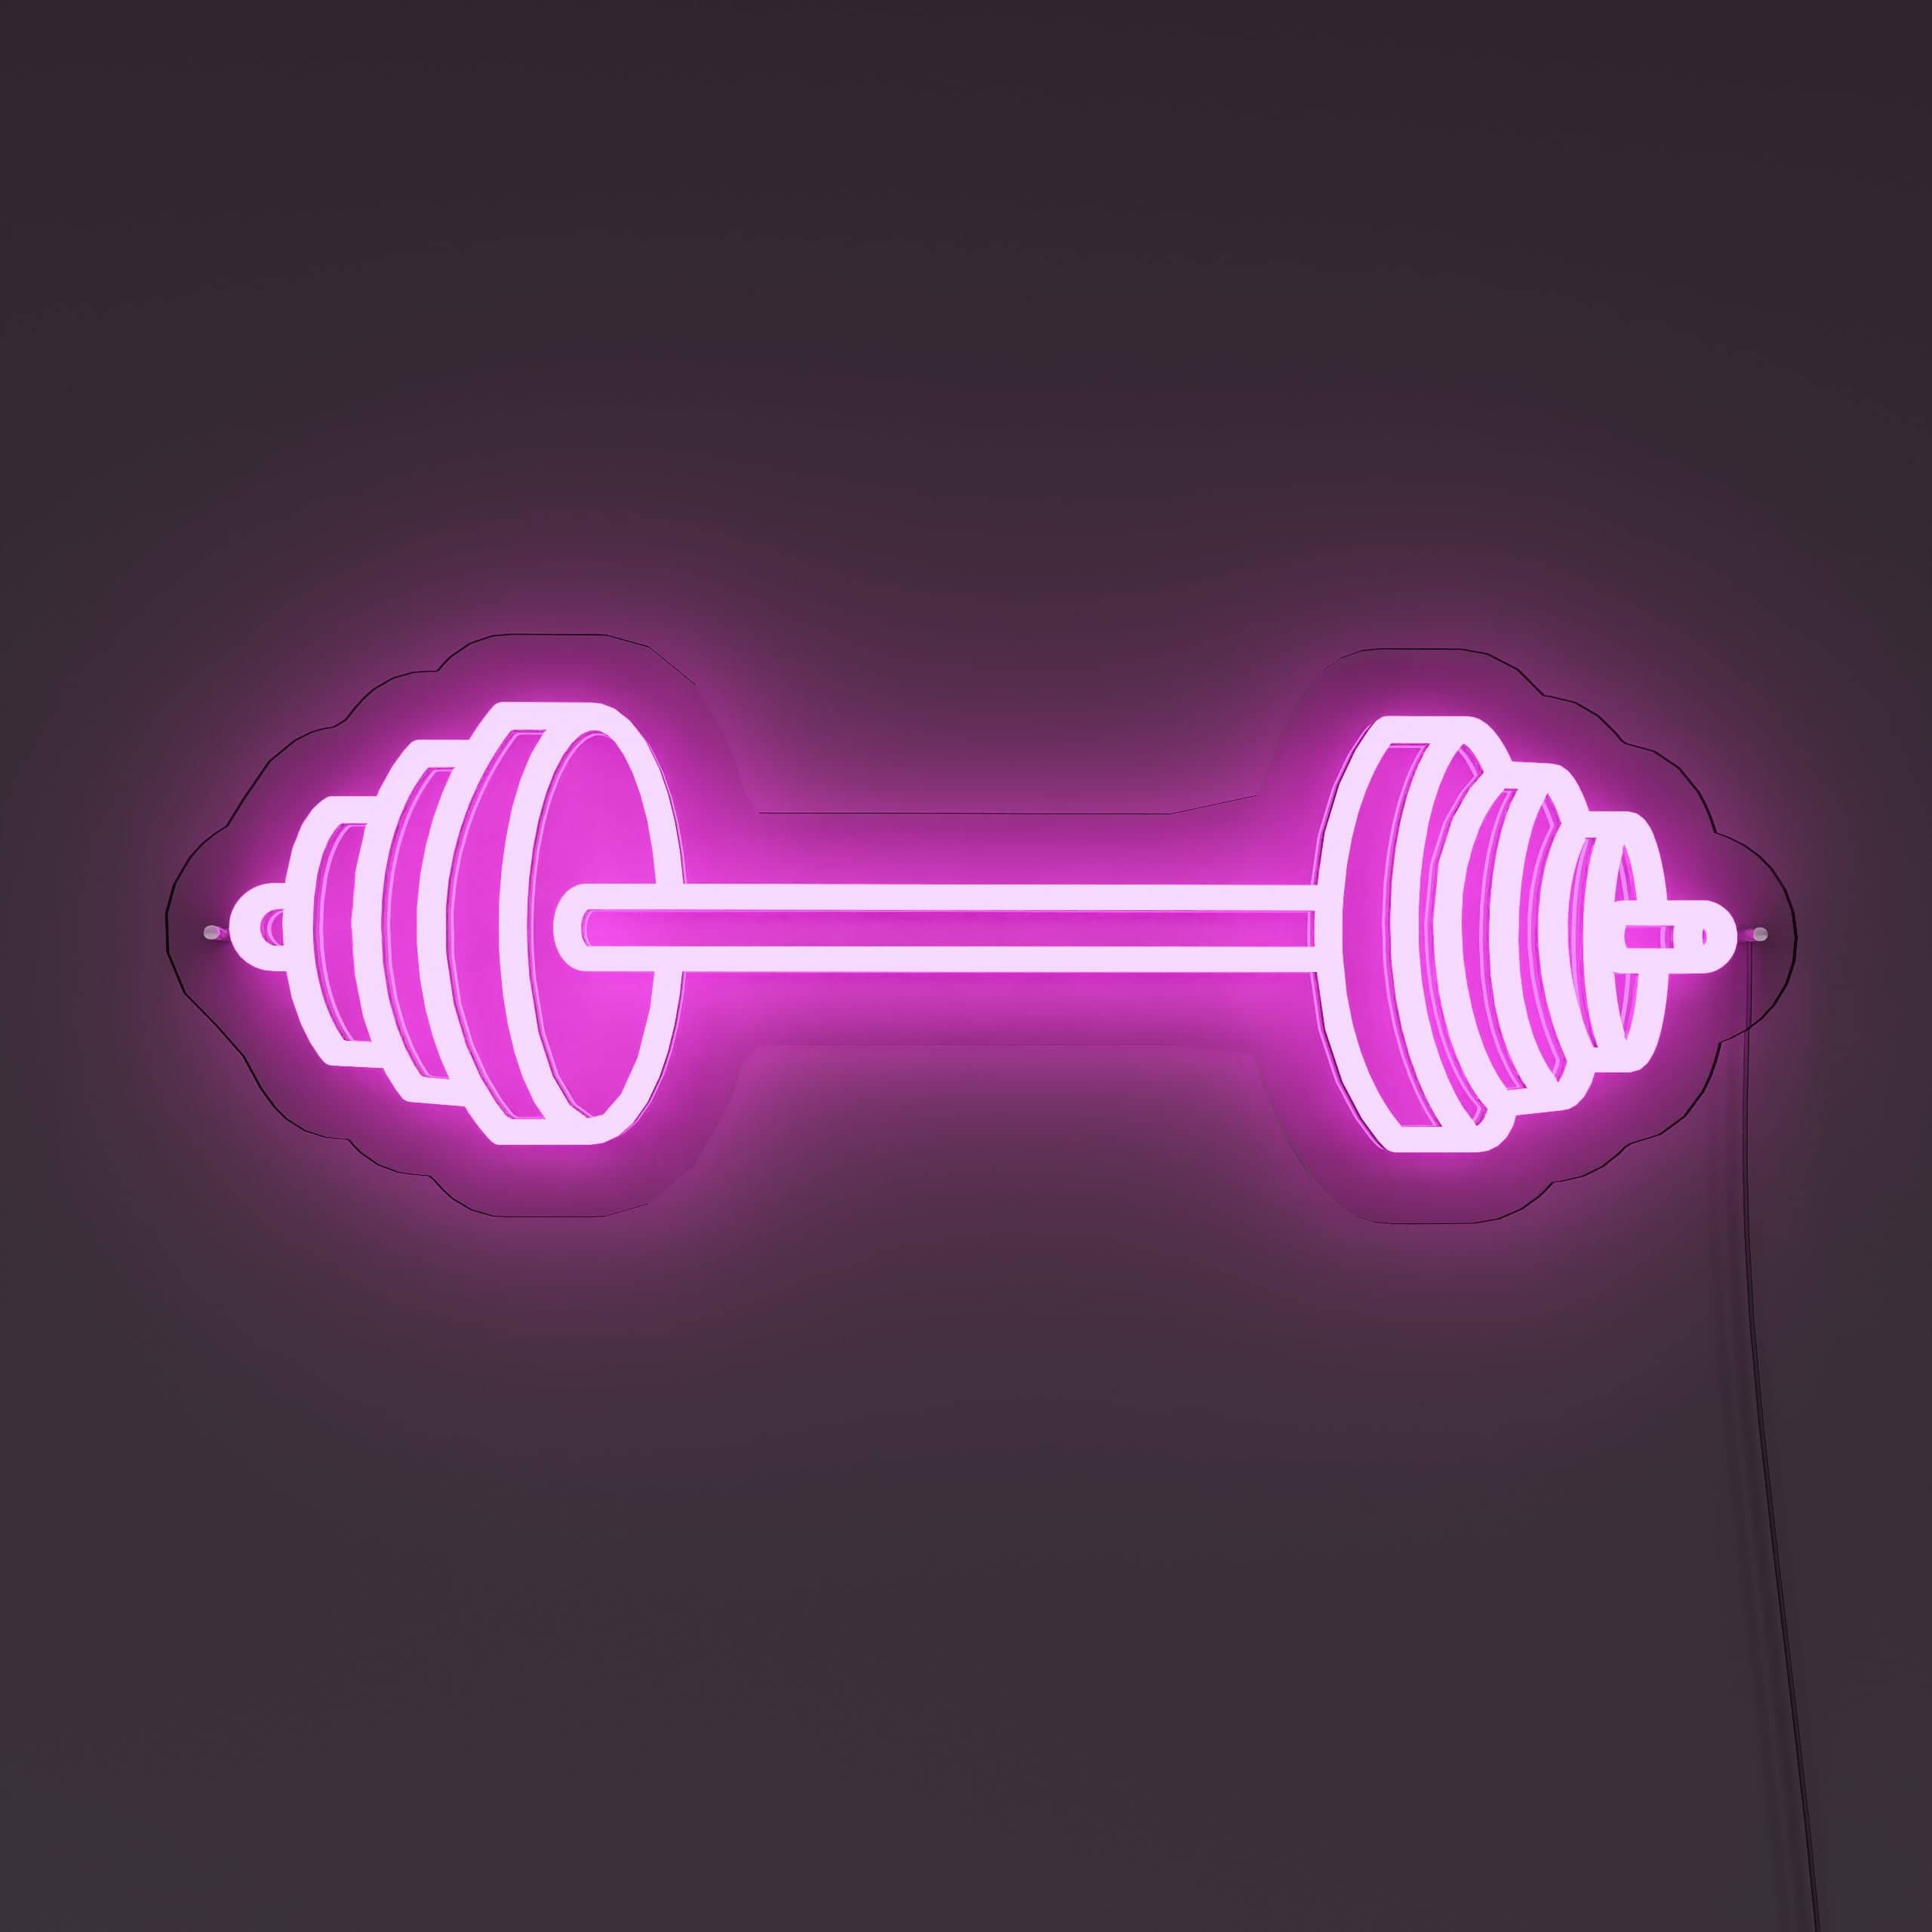 weightlifting-implement-neon-sign-lite